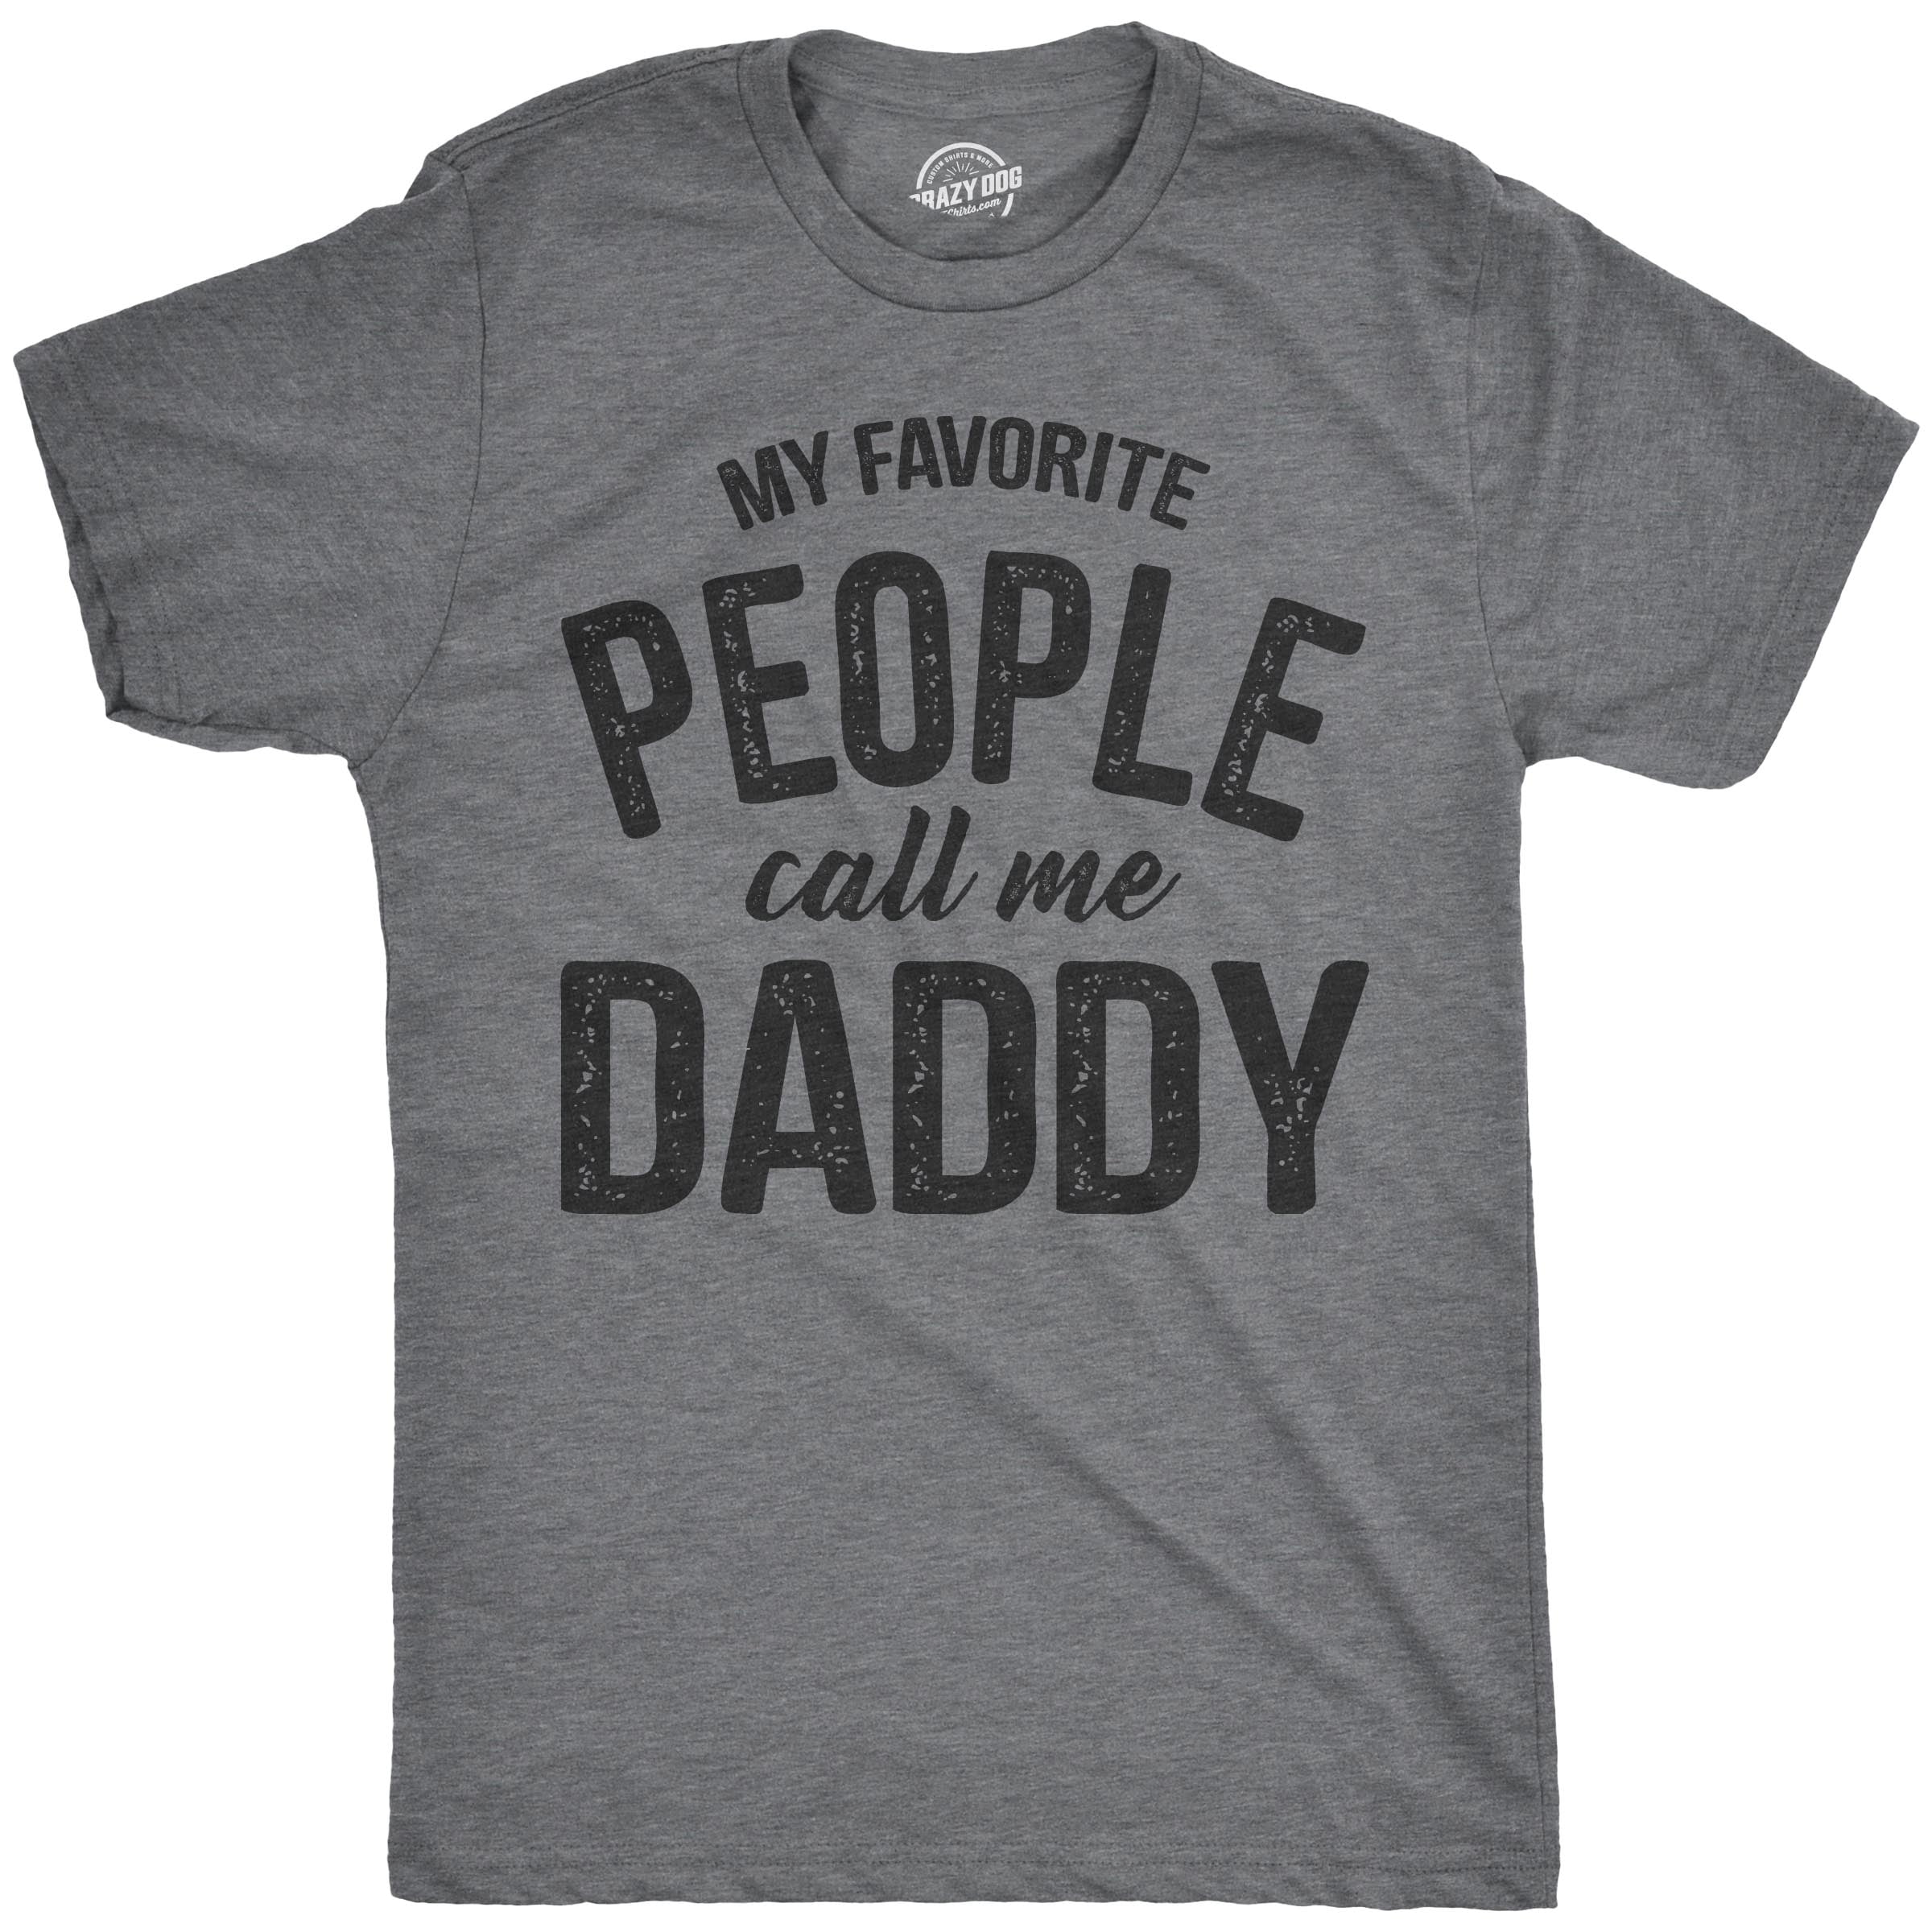 This Guy Is Going To Be A Daddy buzz shirts Gift For Fathers Mens Organic Cotton T-Shirt Gift